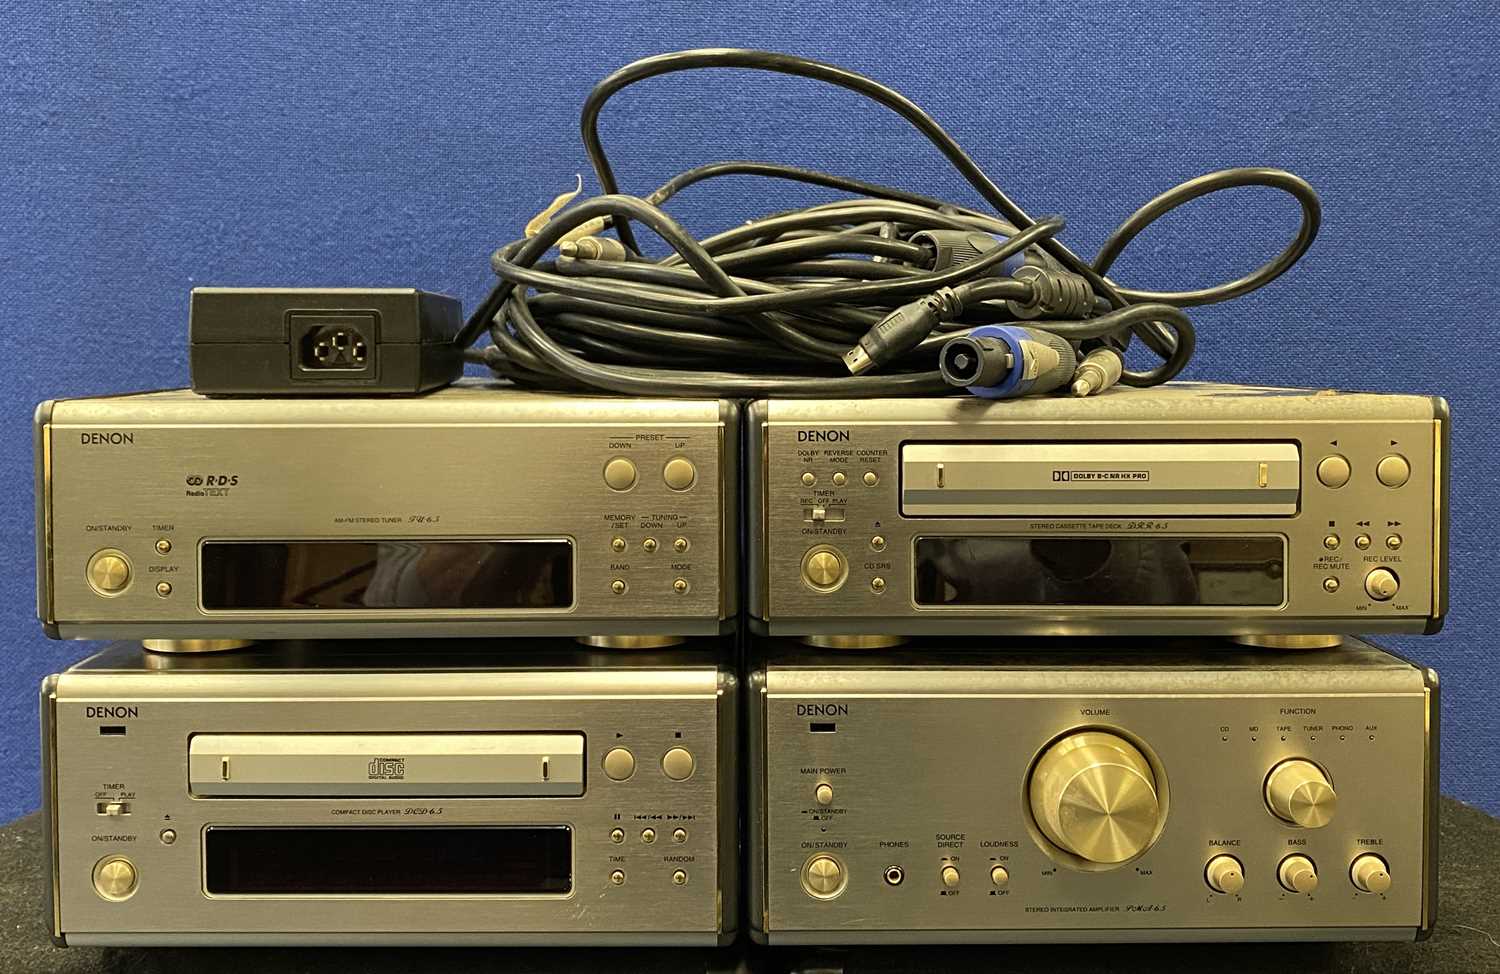 STEREO EQUIPMENT including a Denon HiFi - TU-6.5am/fm stereo tuner, DCD-6.5 compact disc player, - Image 2 of 4